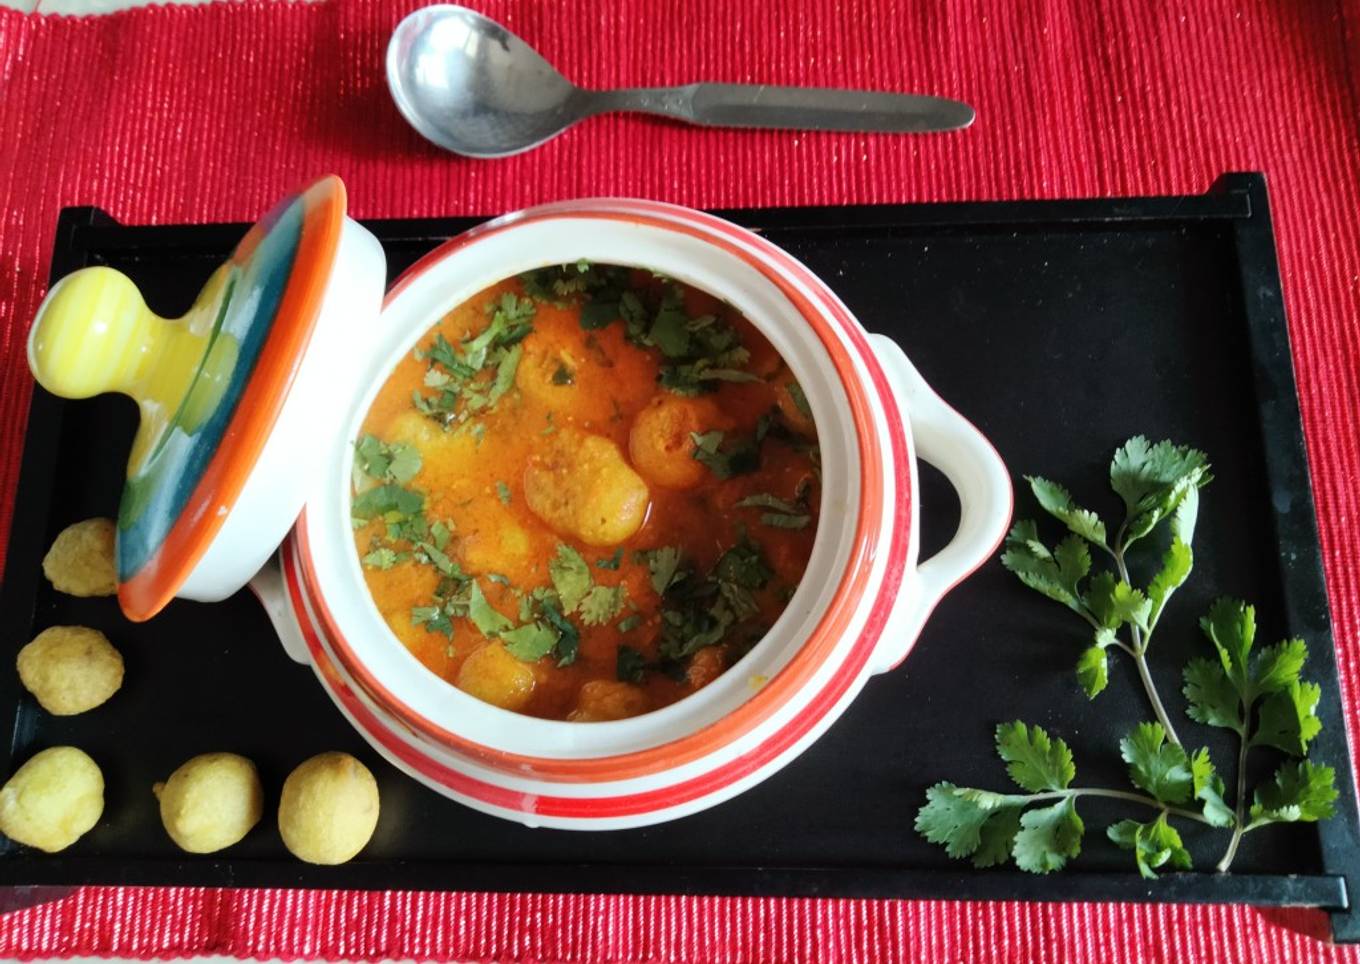 Dhania flavoured moong dal balls in red tomato curry